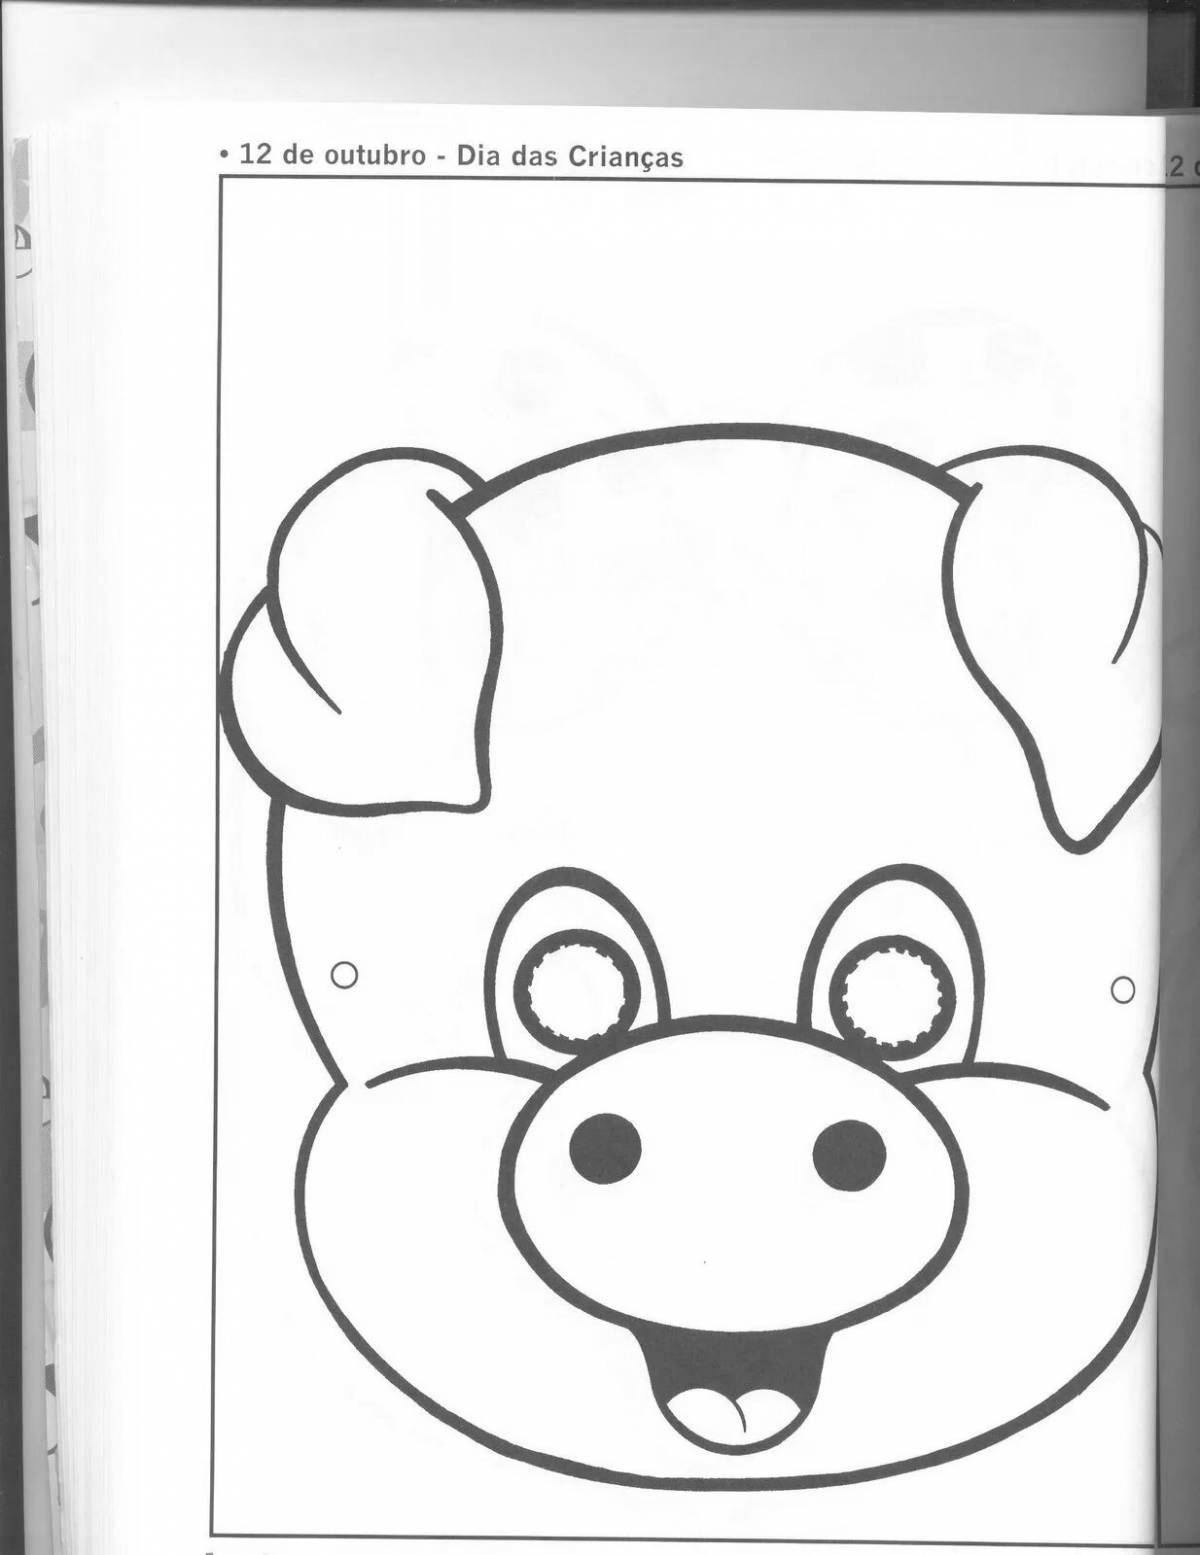 Creative animal head mask coloring book for kids